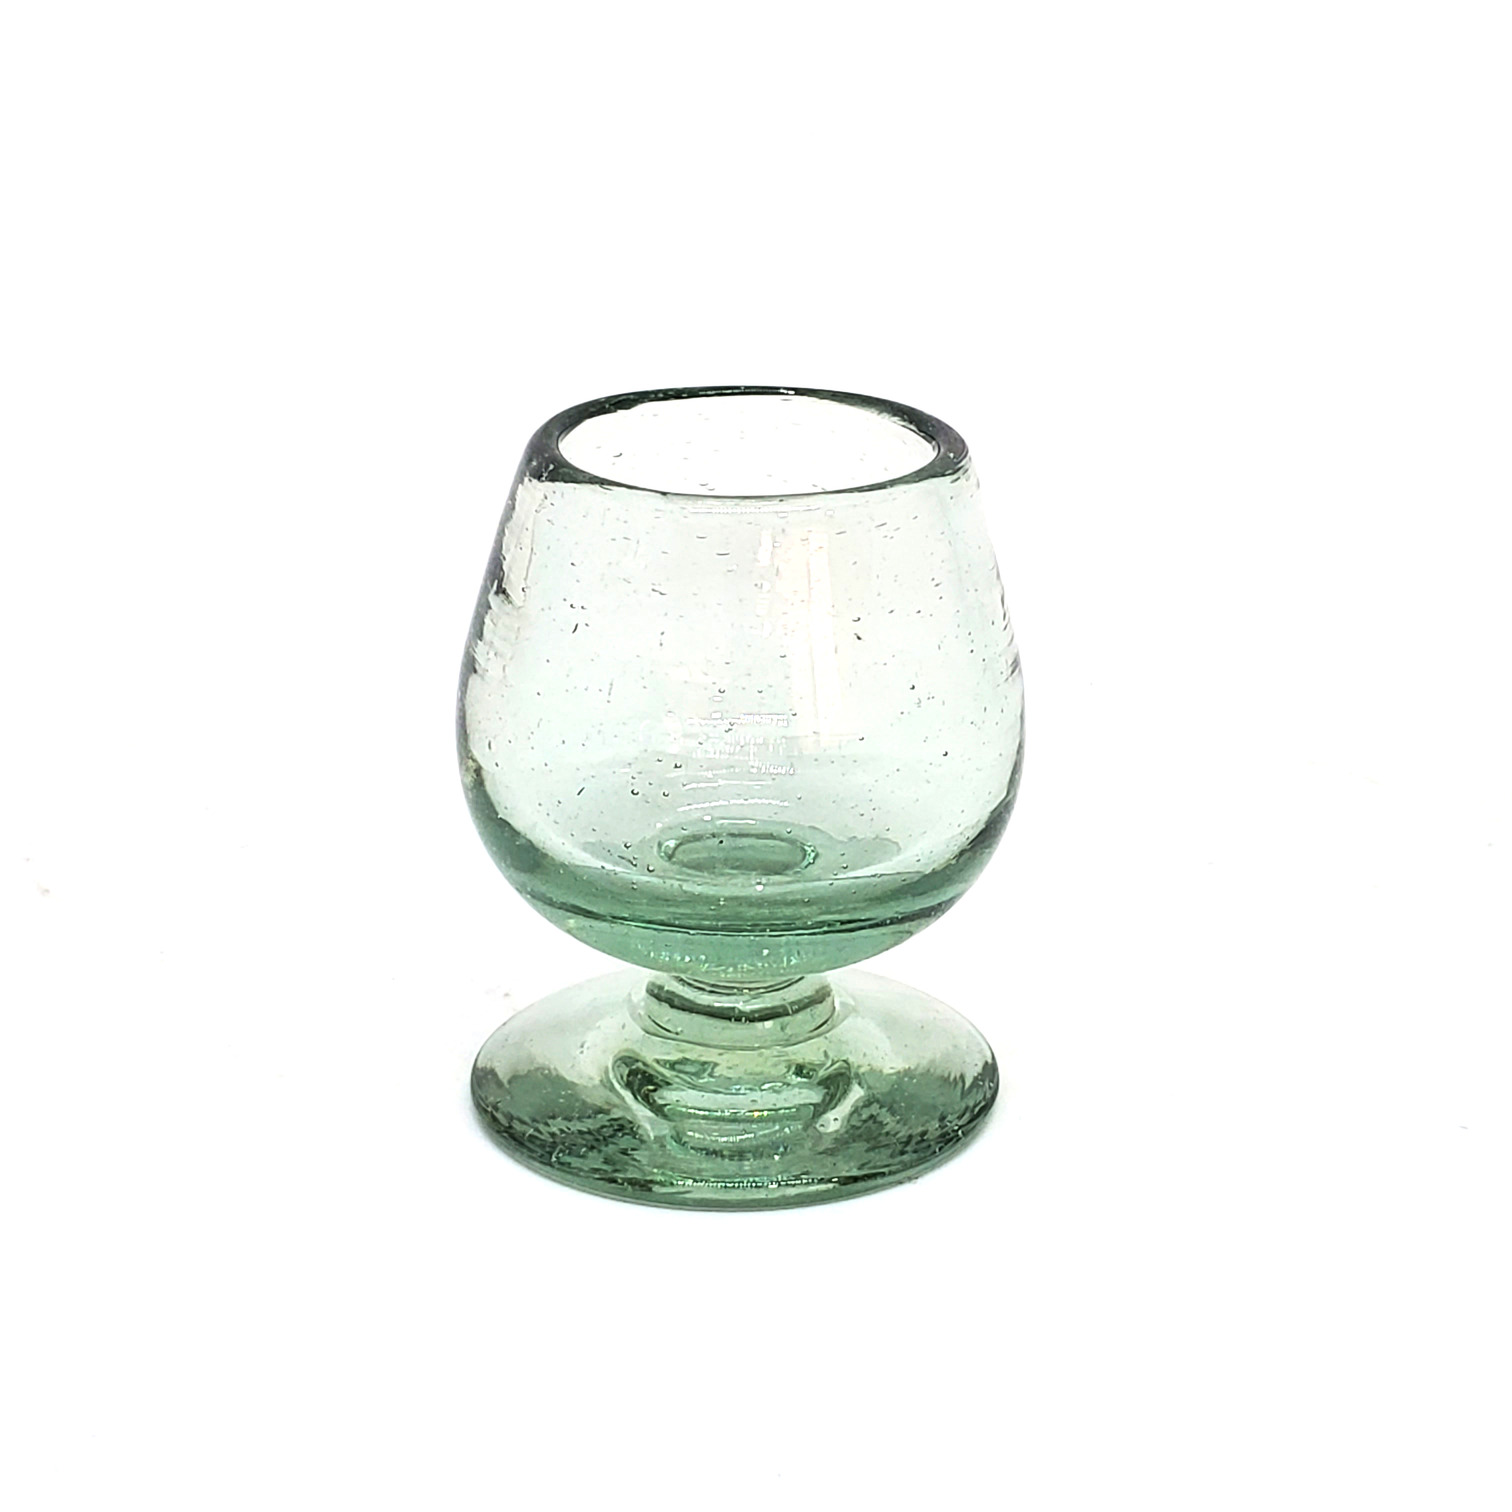 Clear Glassware / Clear Tequila Sippers (set of 6) / Sip your favourite tequila or mezcal with these iconic clear handcrafted sipping glasses. You may also serve lemon juice or other chasers.